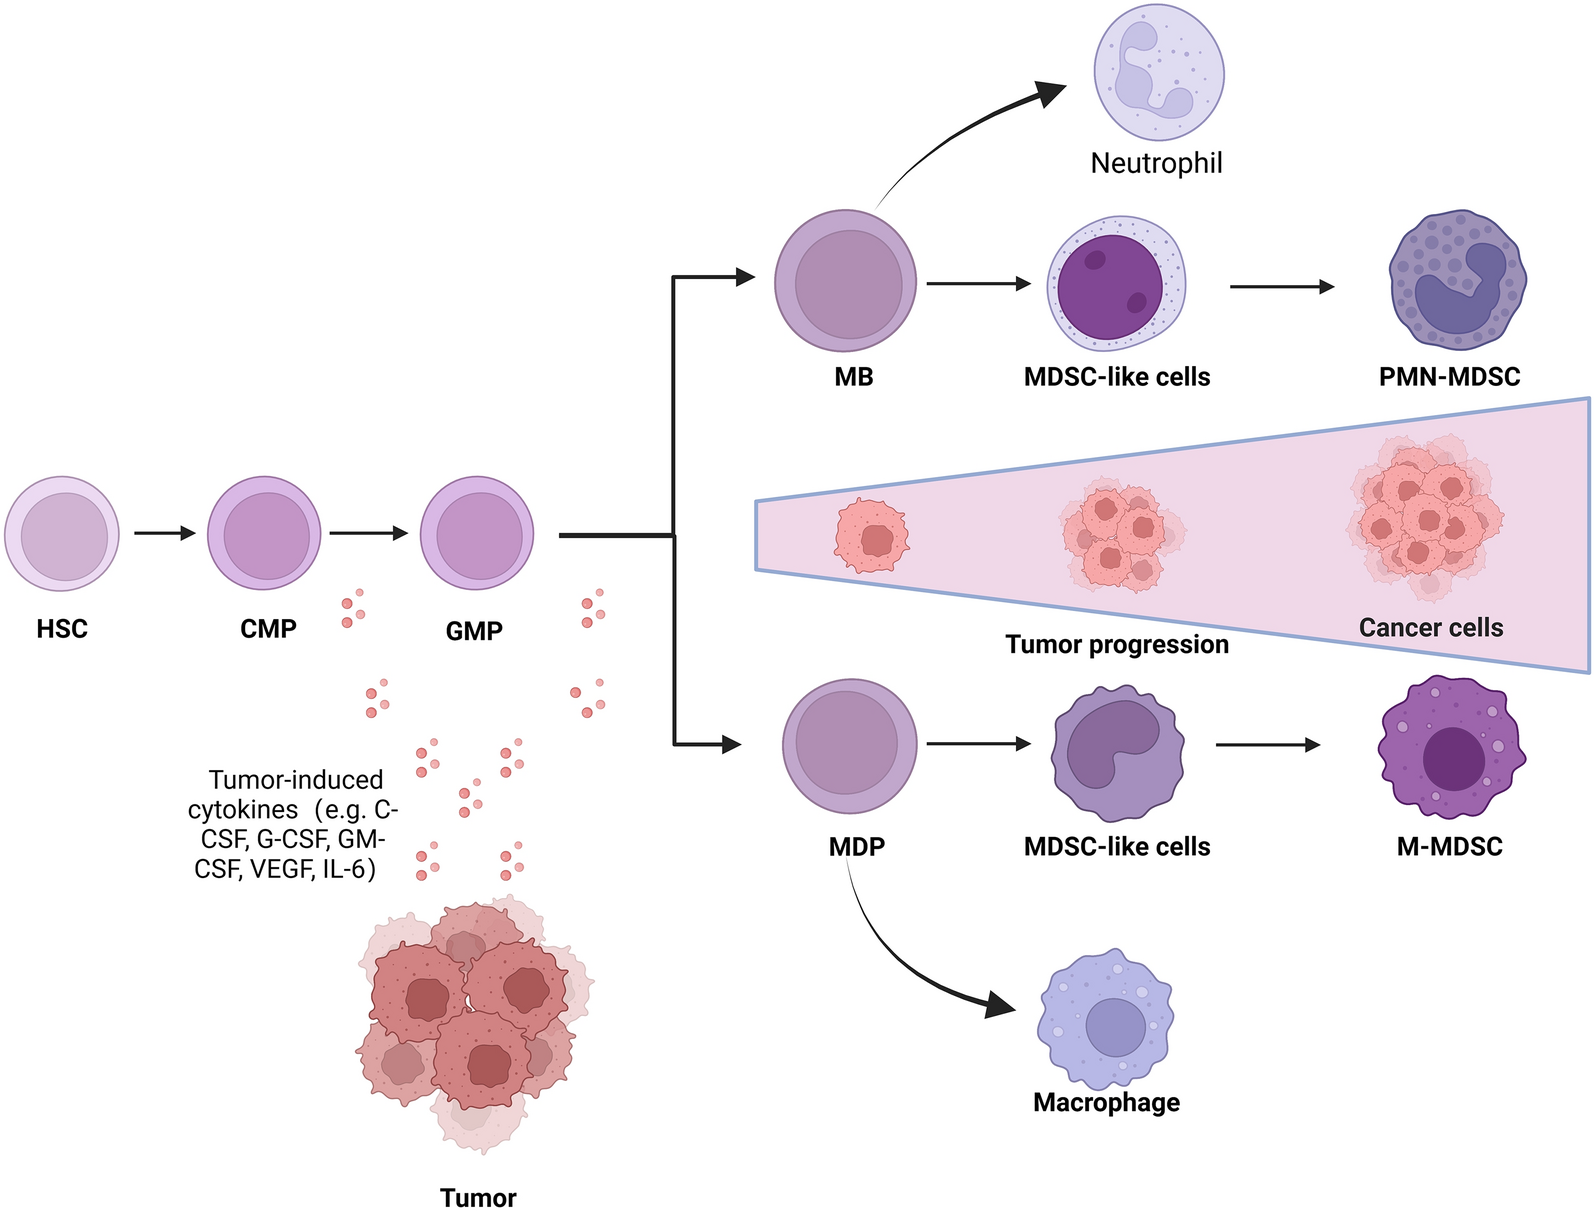 Myeloid-derived suppressor cells in cancer: therapeutic targets to overcome tumor immune evasion